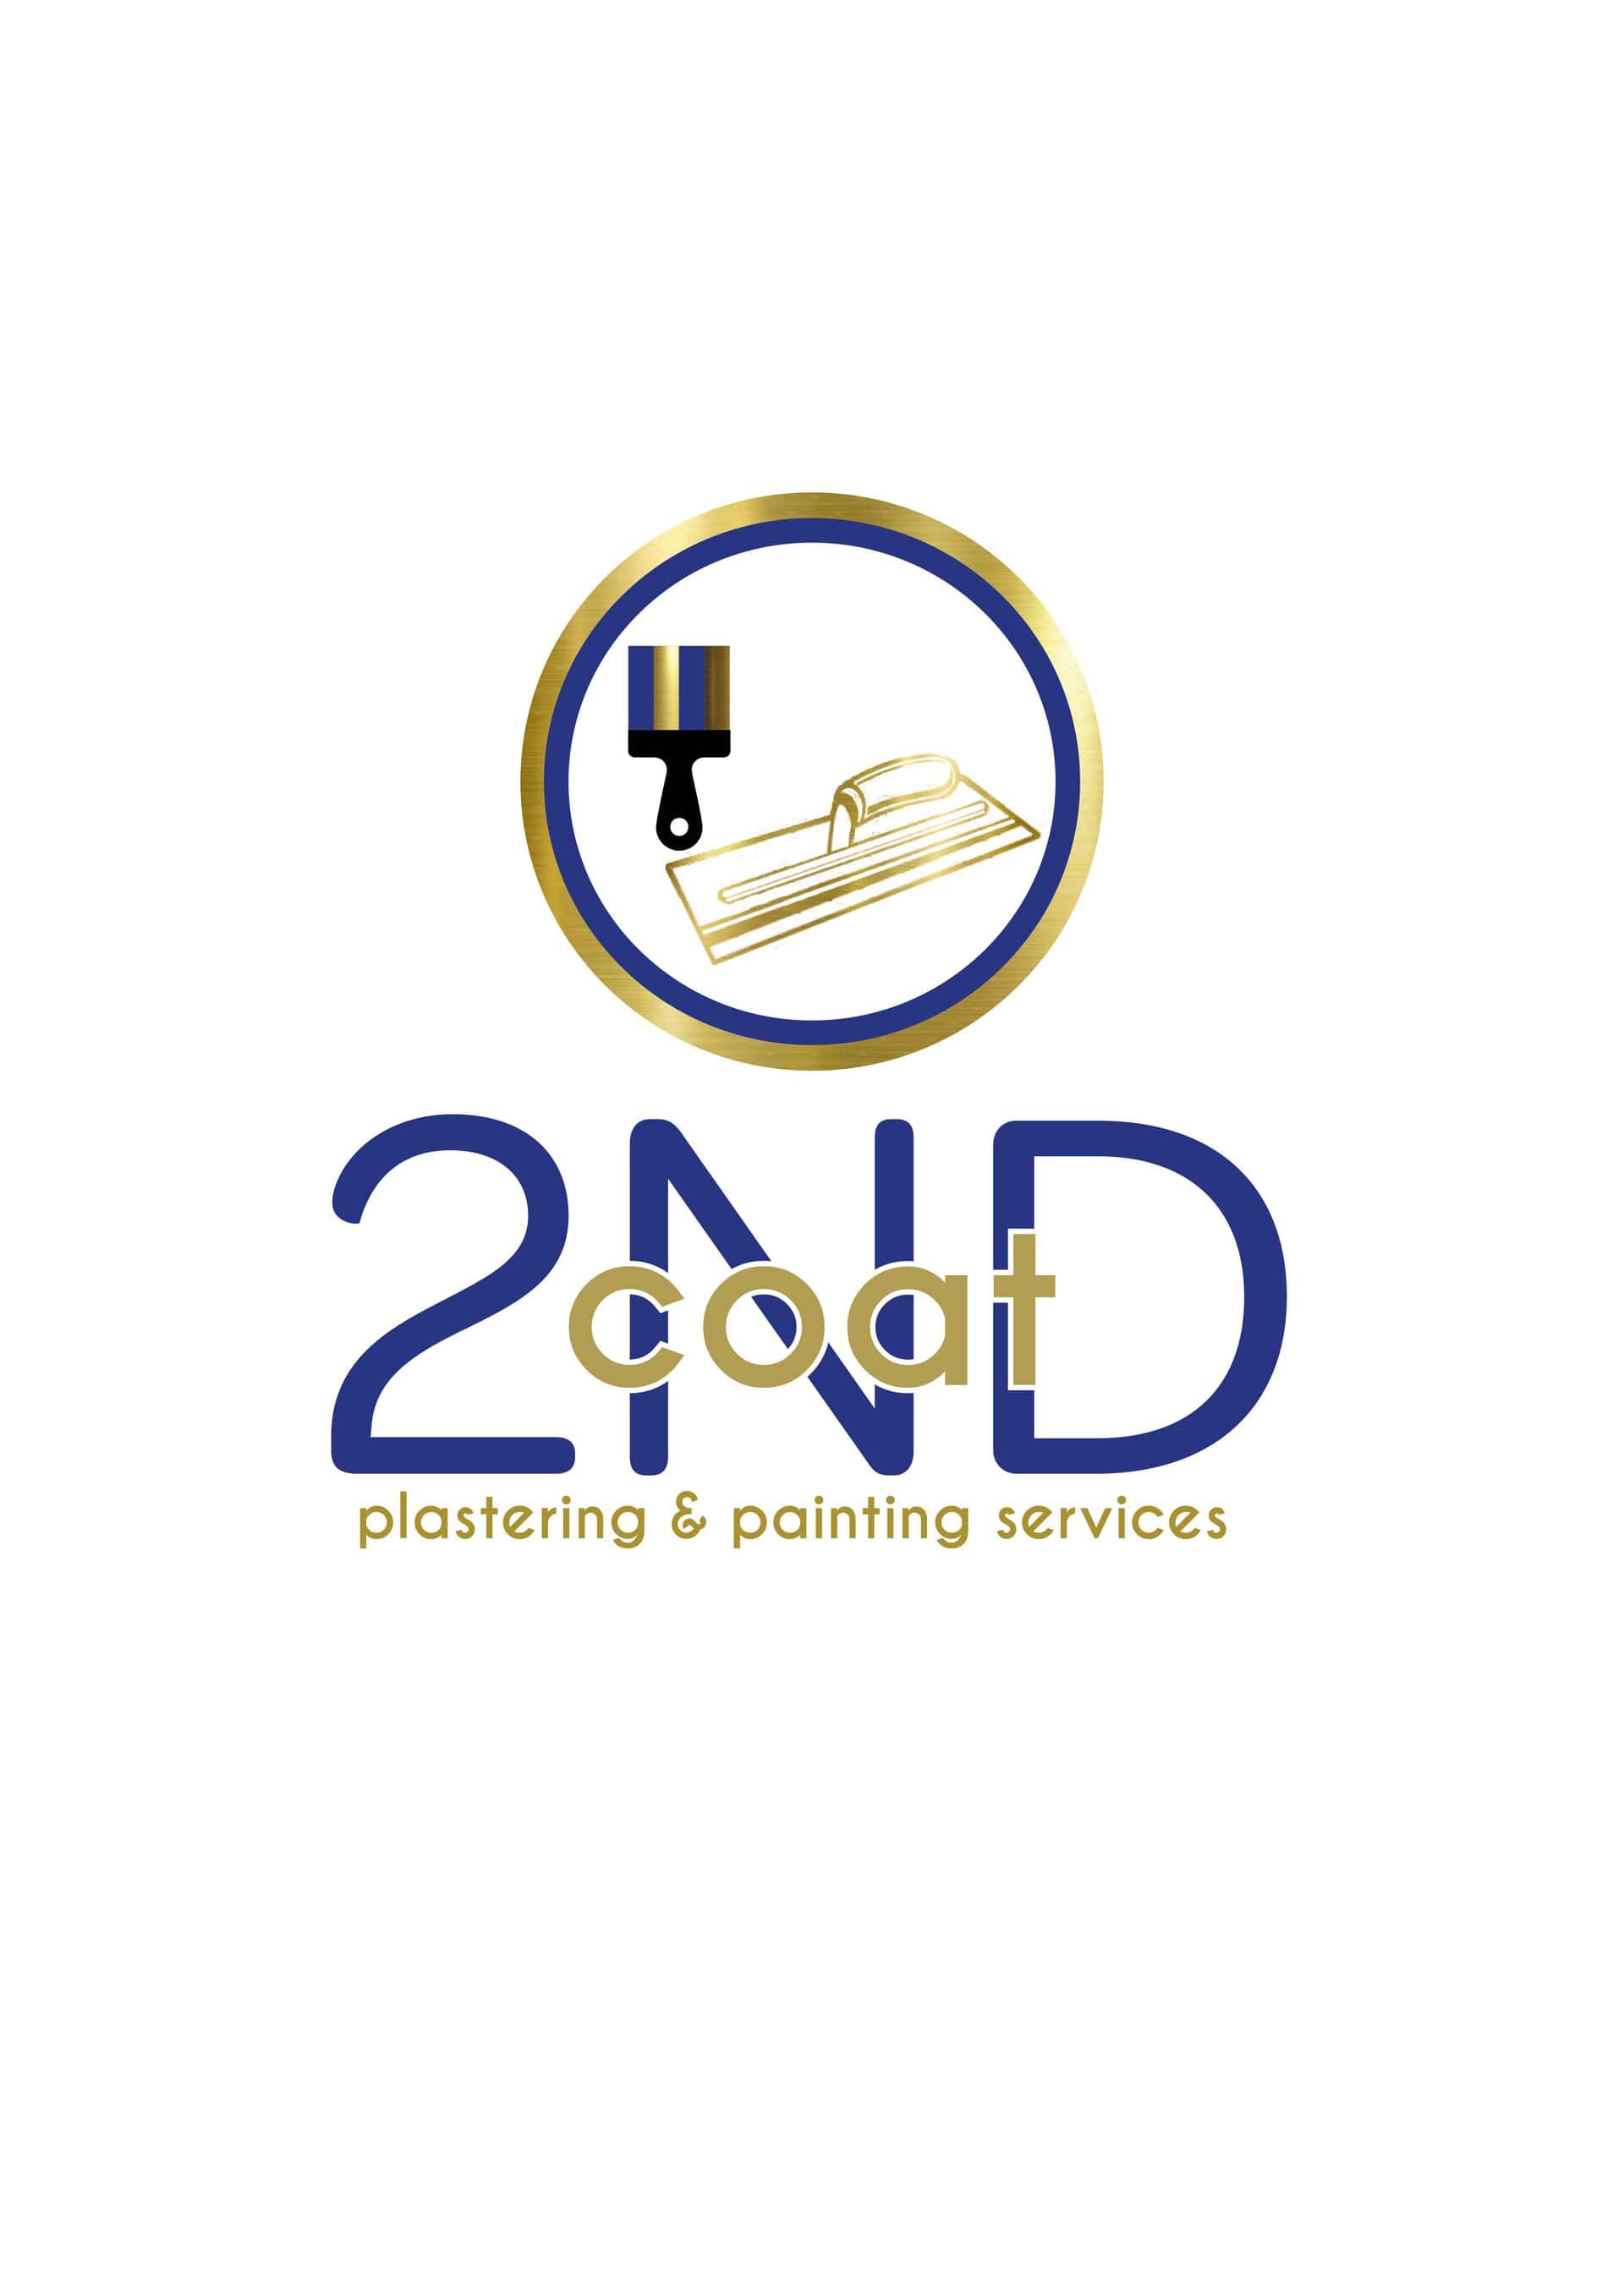 2nd coat plastering and painting services